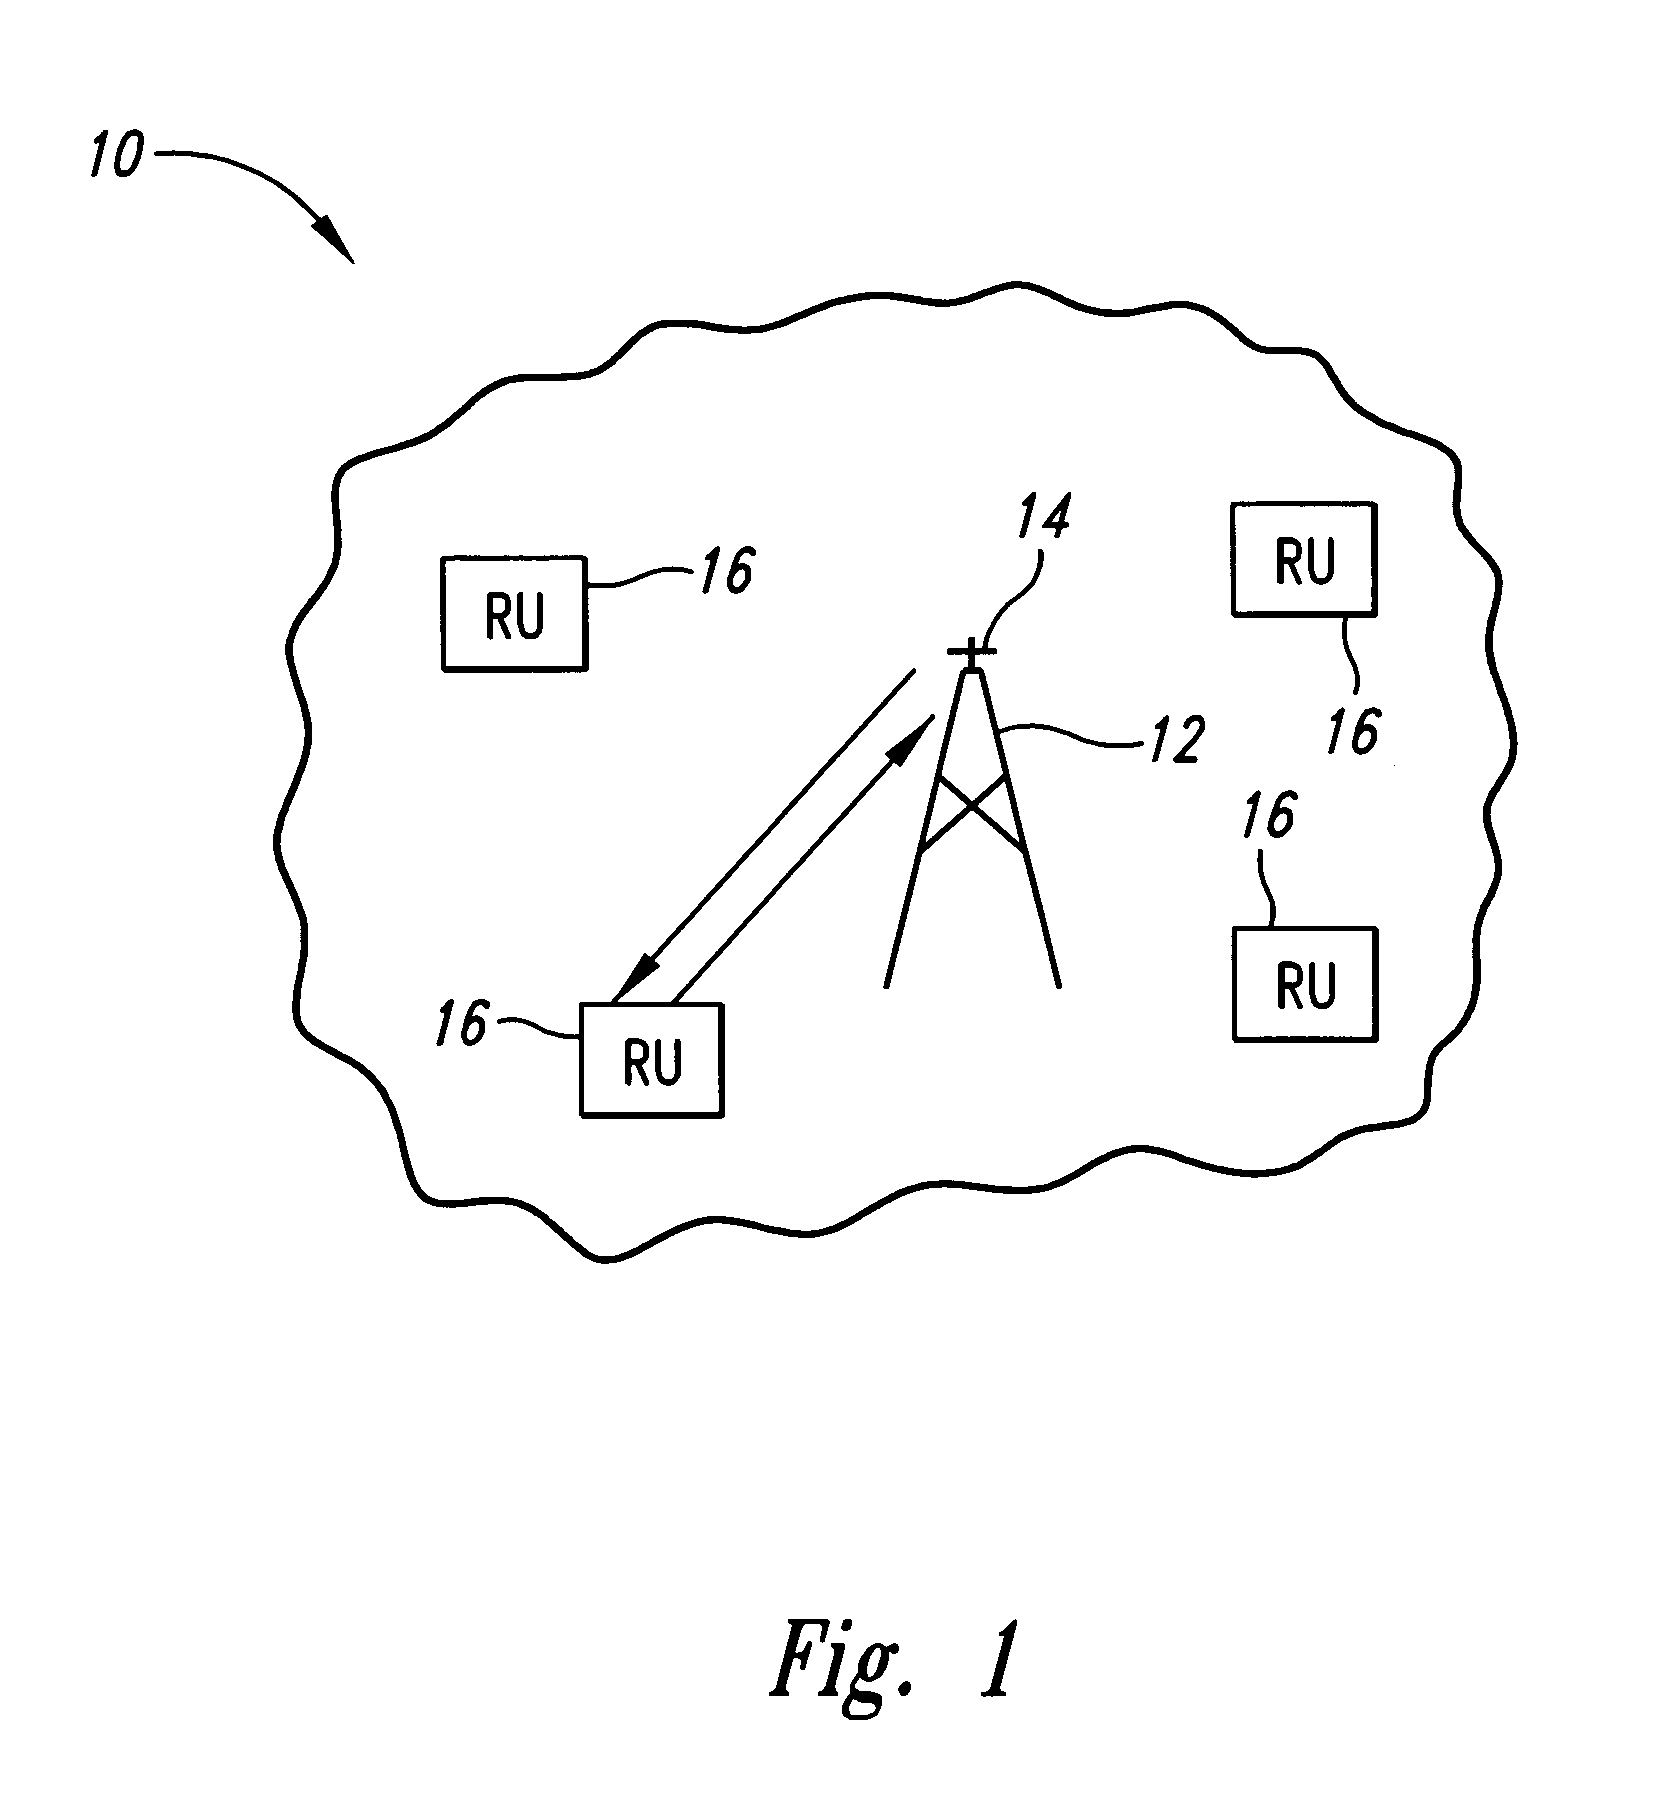 Method and apparatus for use in reducing overutilization of RF communication system resources